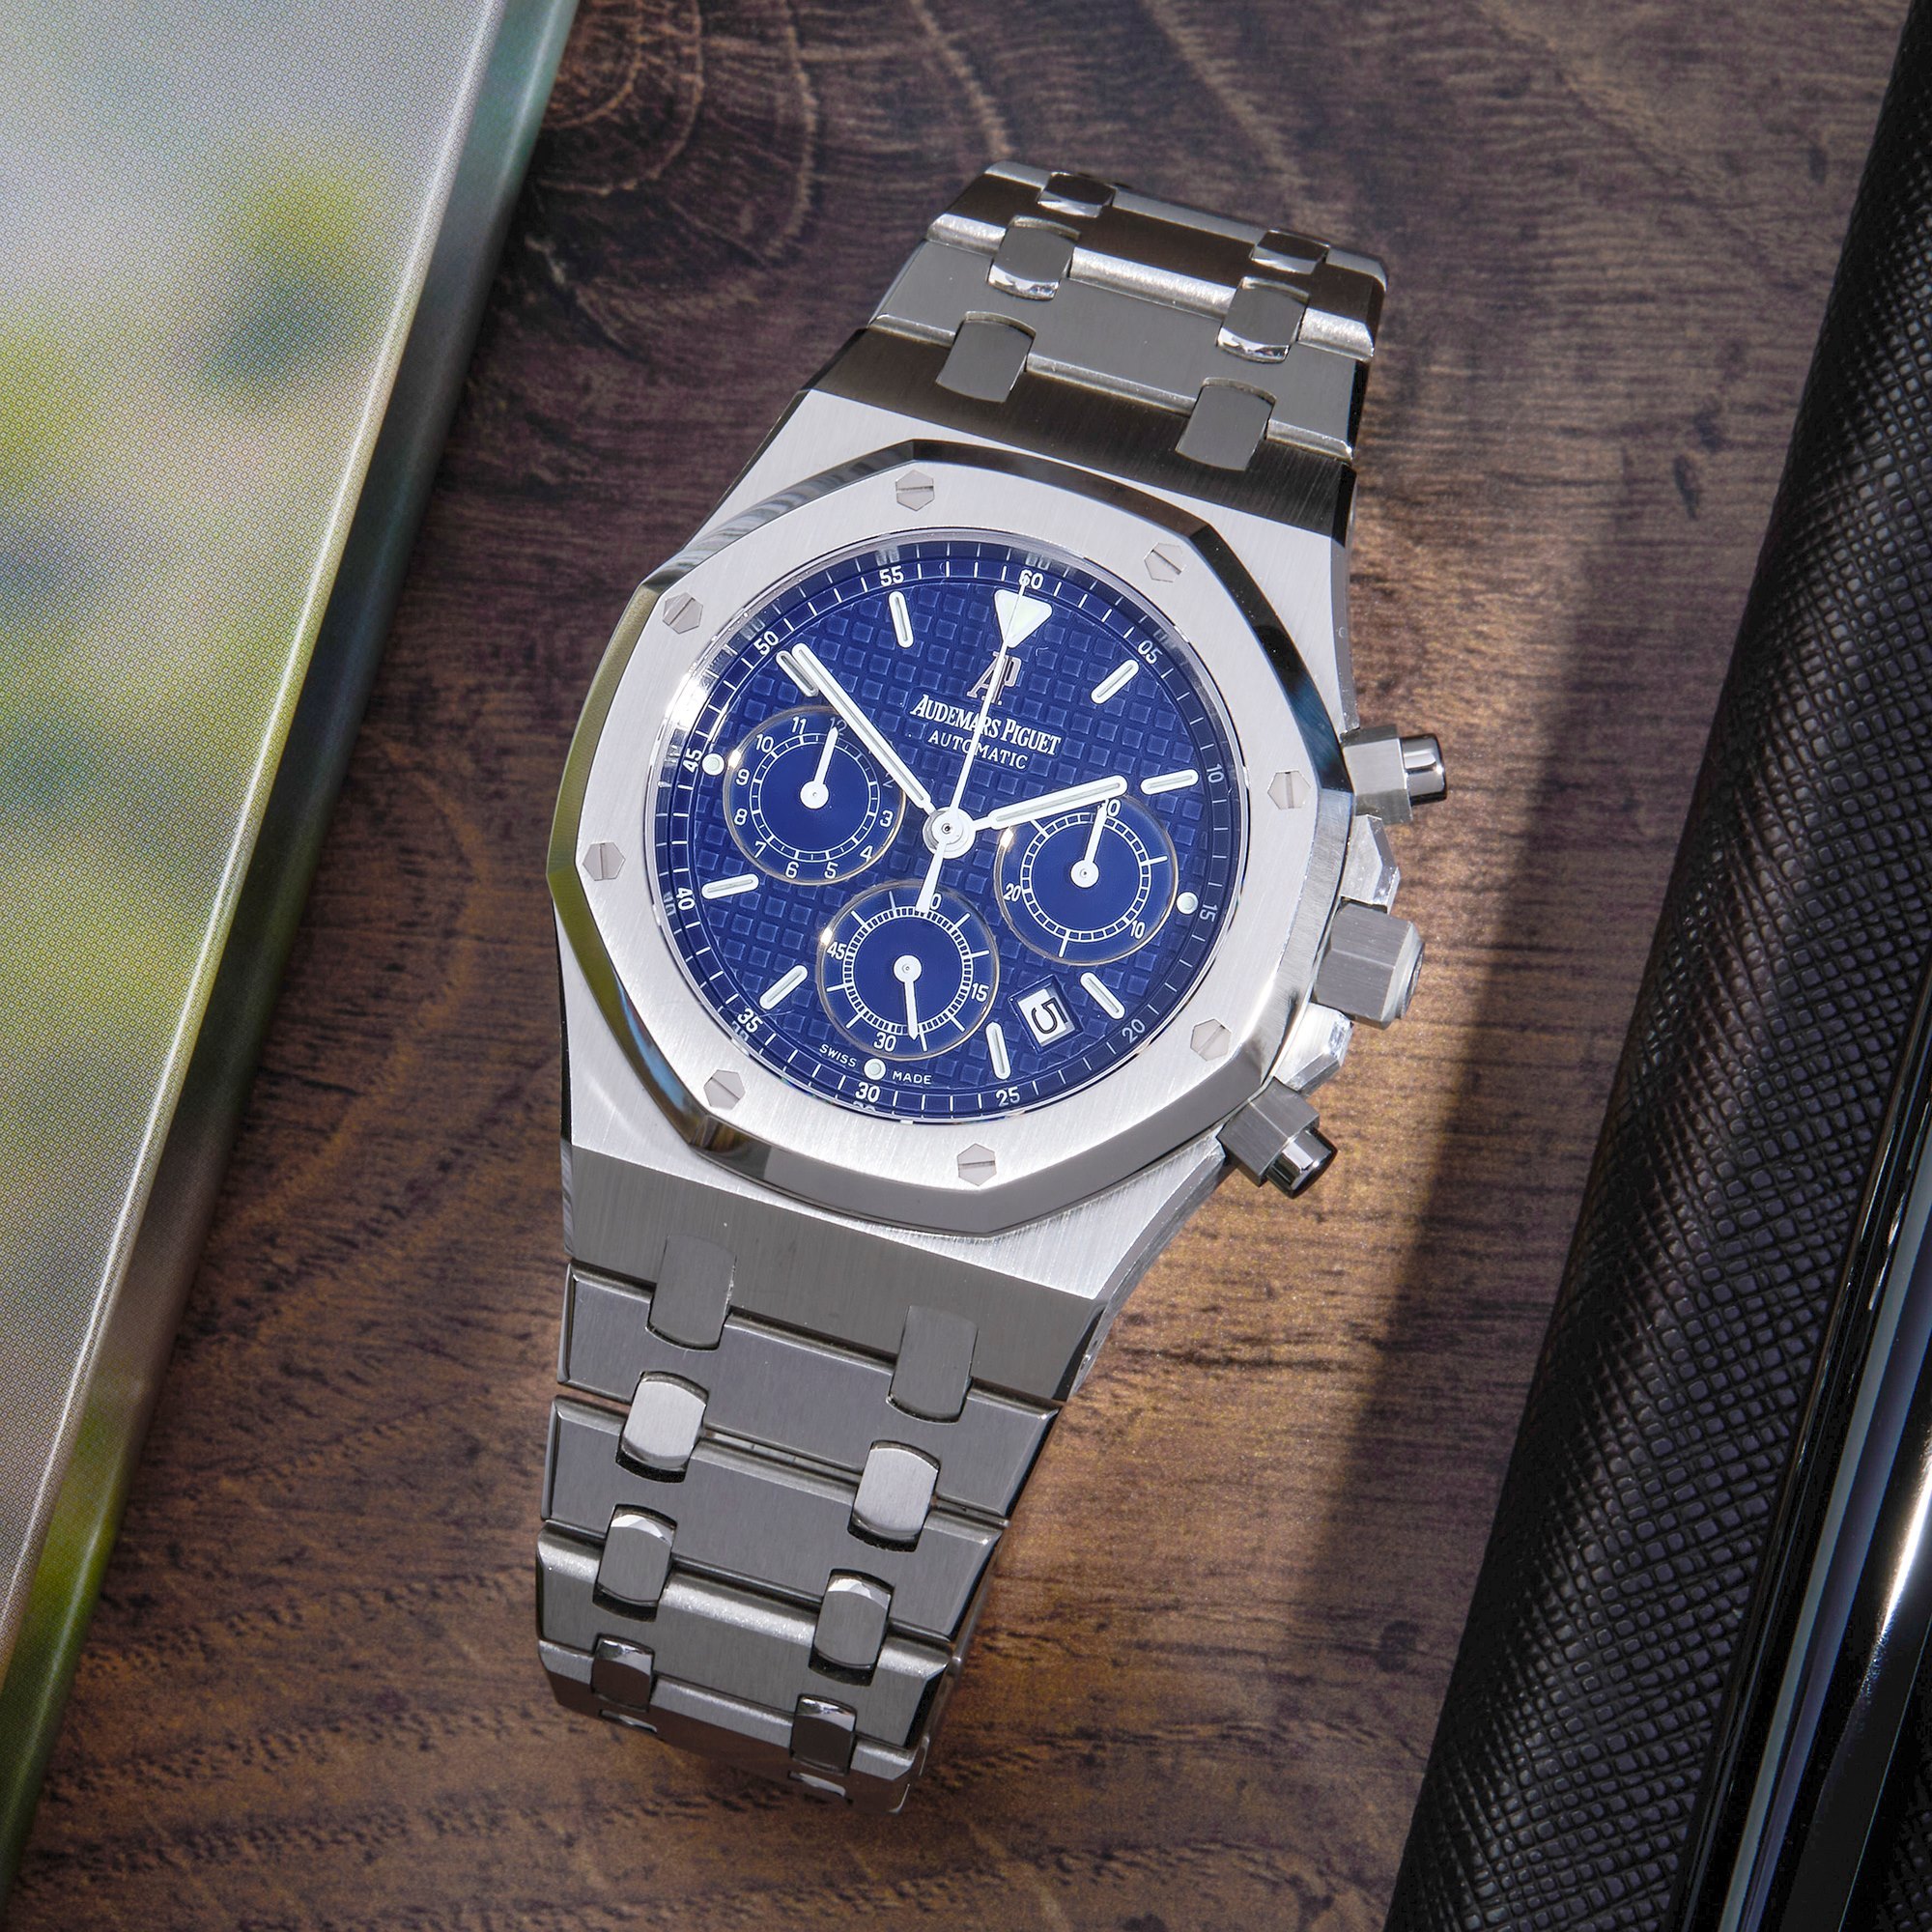 Audemars Piguet Royal Oak Chronograph Cosmos Dial Stainless Steel 25860ST.OO.1110ST.04